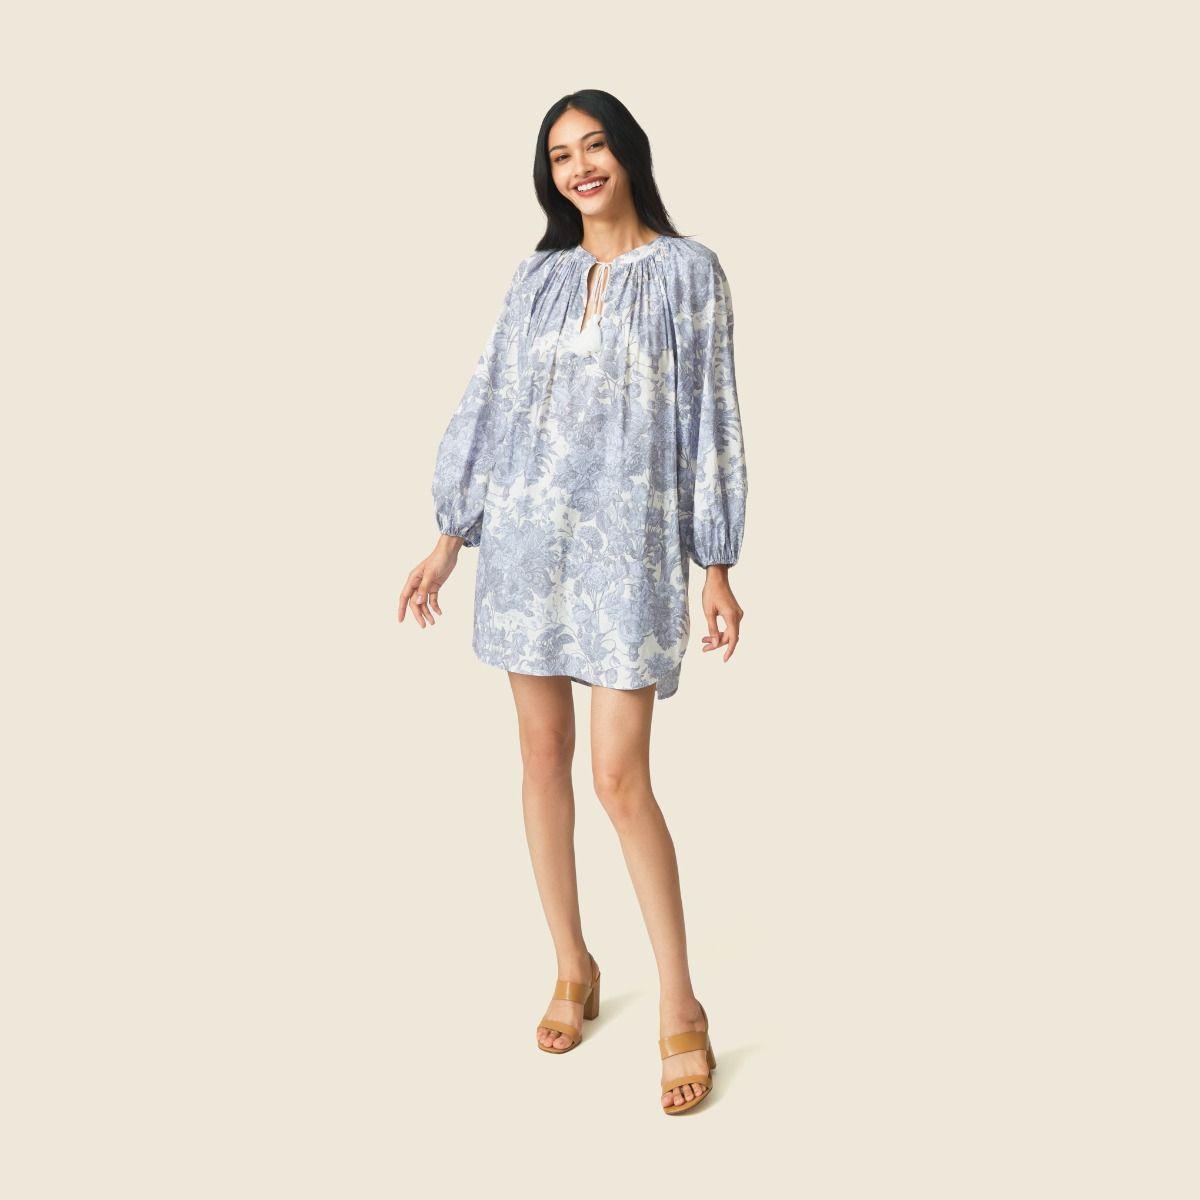 Blooming Cotton Boho Long Sleeve Cover Up Dress - Blue / Grey	